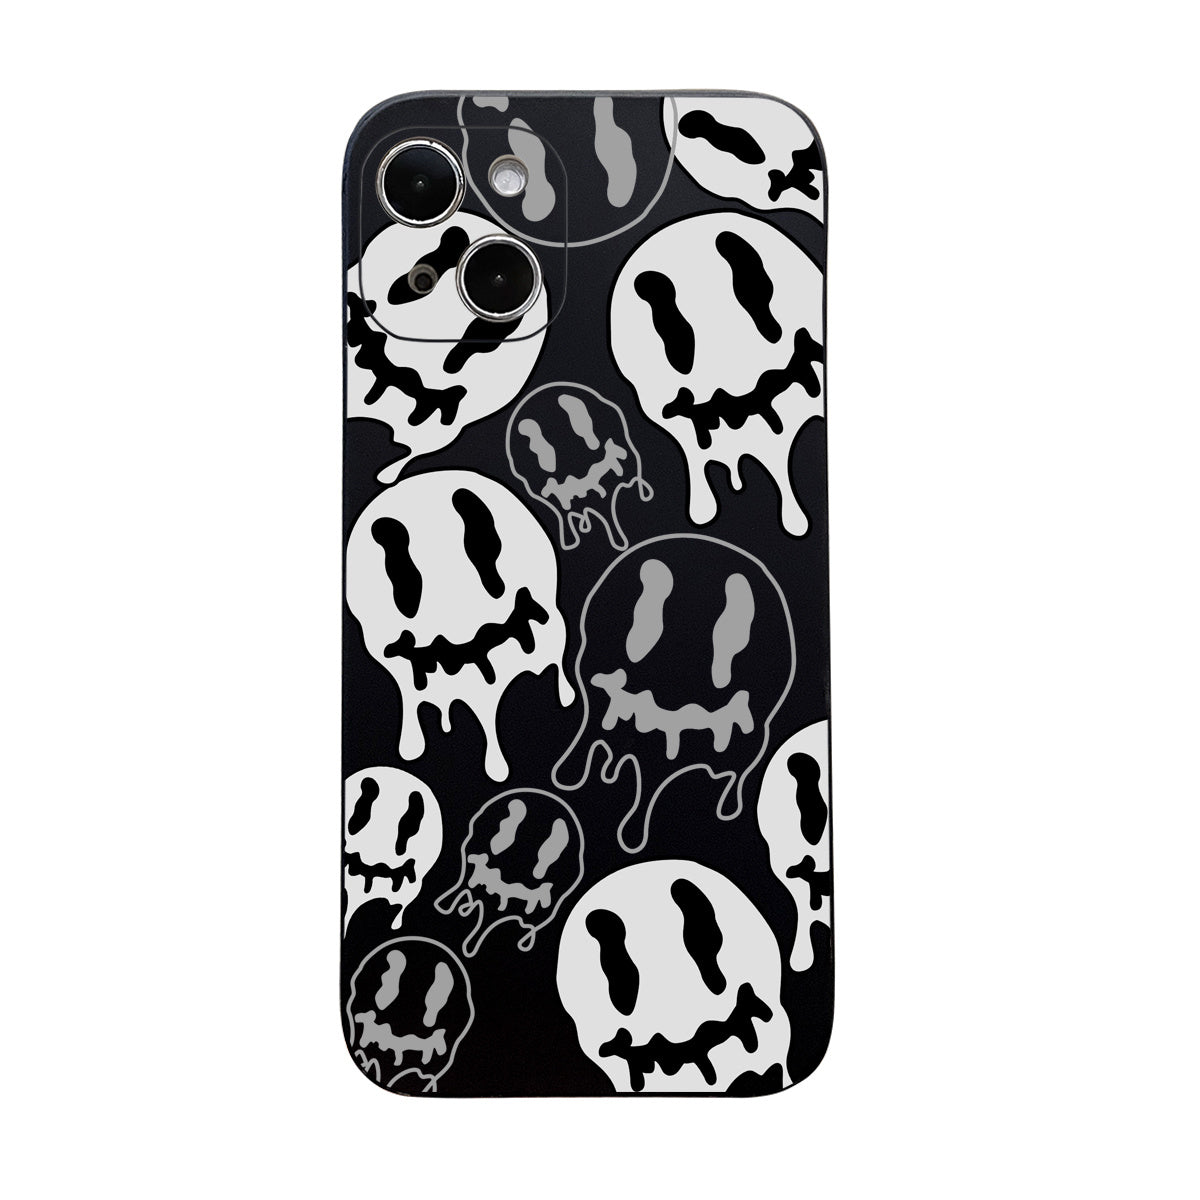 Cool Smile From Soft Glue Following From Terror  Phone Case